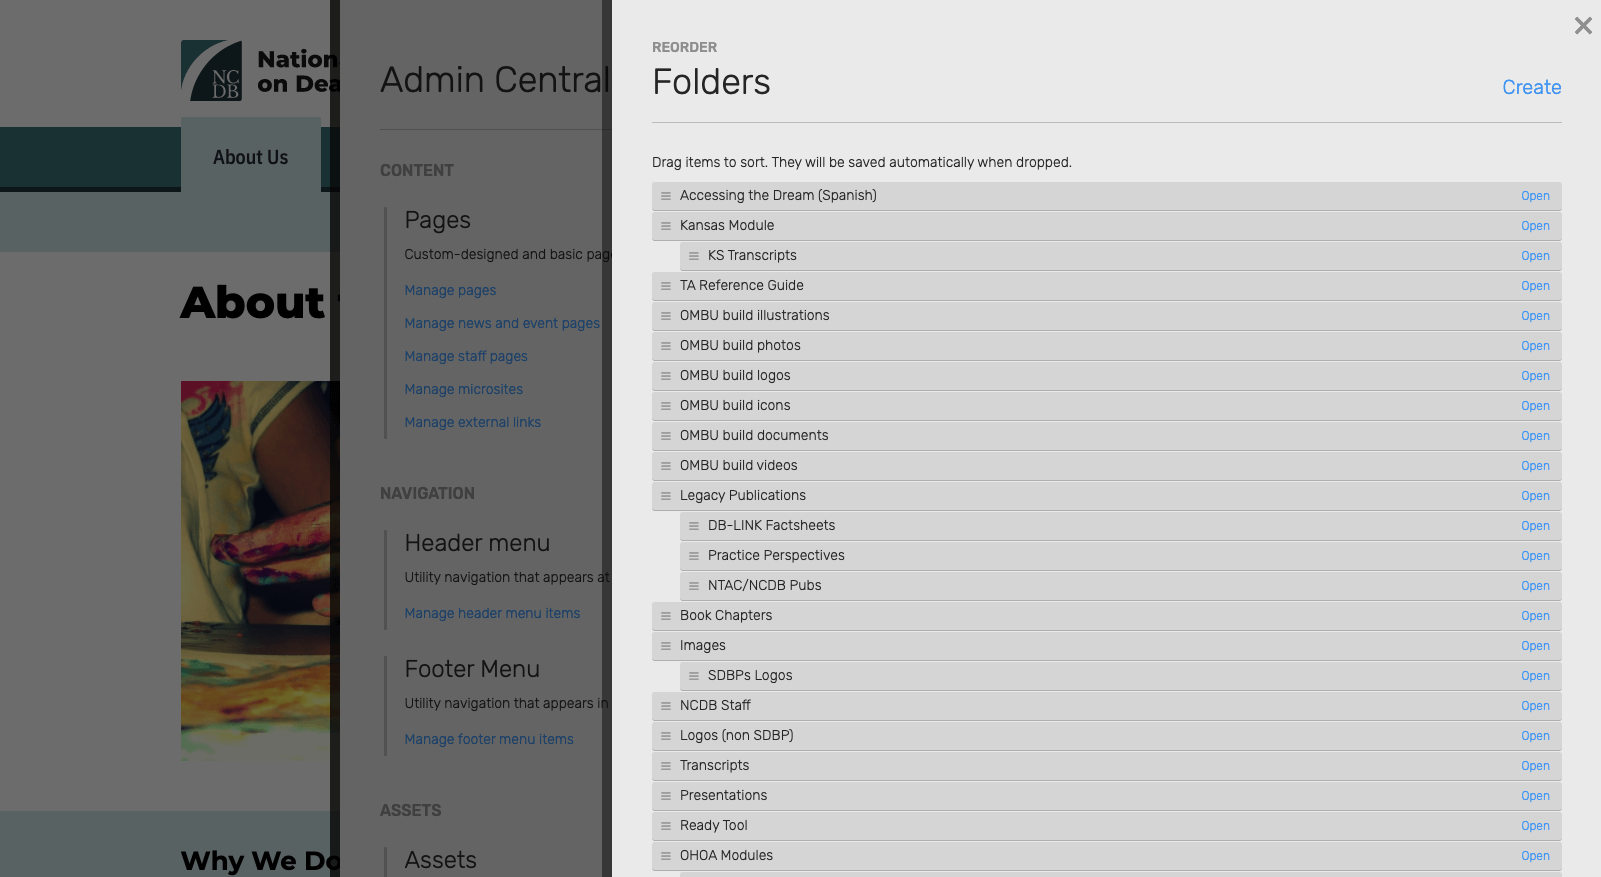 Screenshot of the asset folder editing interface, with drag-and-drop list of folder names